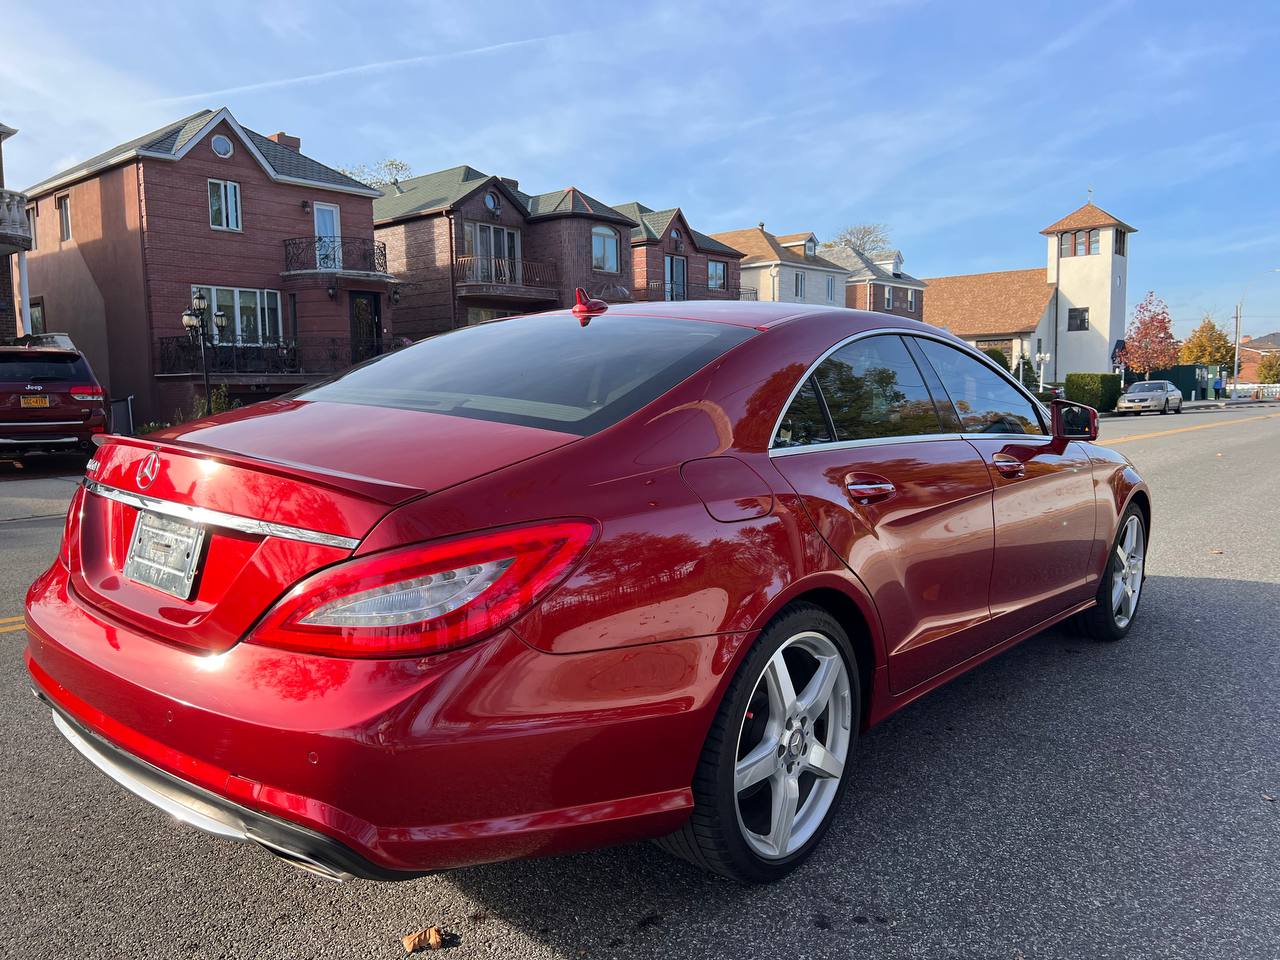 Used - Mercedes-Benz CLS 550 Sedan for sale in Staten Island NY